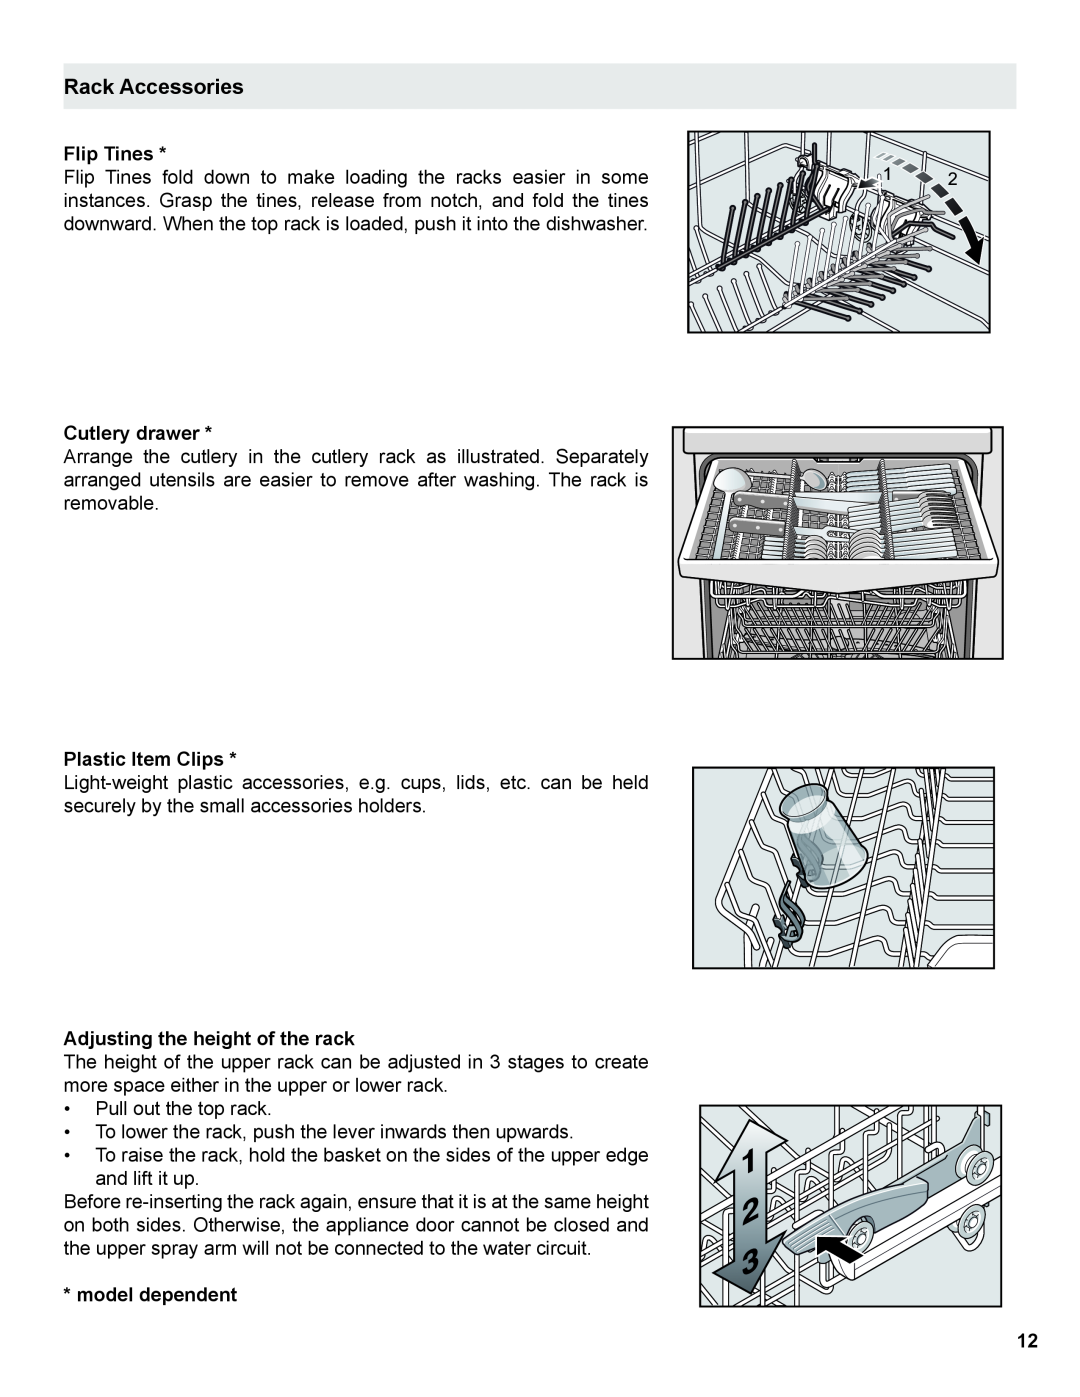 Thermador Dishwasher Rack Accessories, Flip Tines, Cutlery drawer, Plastic Item Clips, Adjusting the height of the rack 